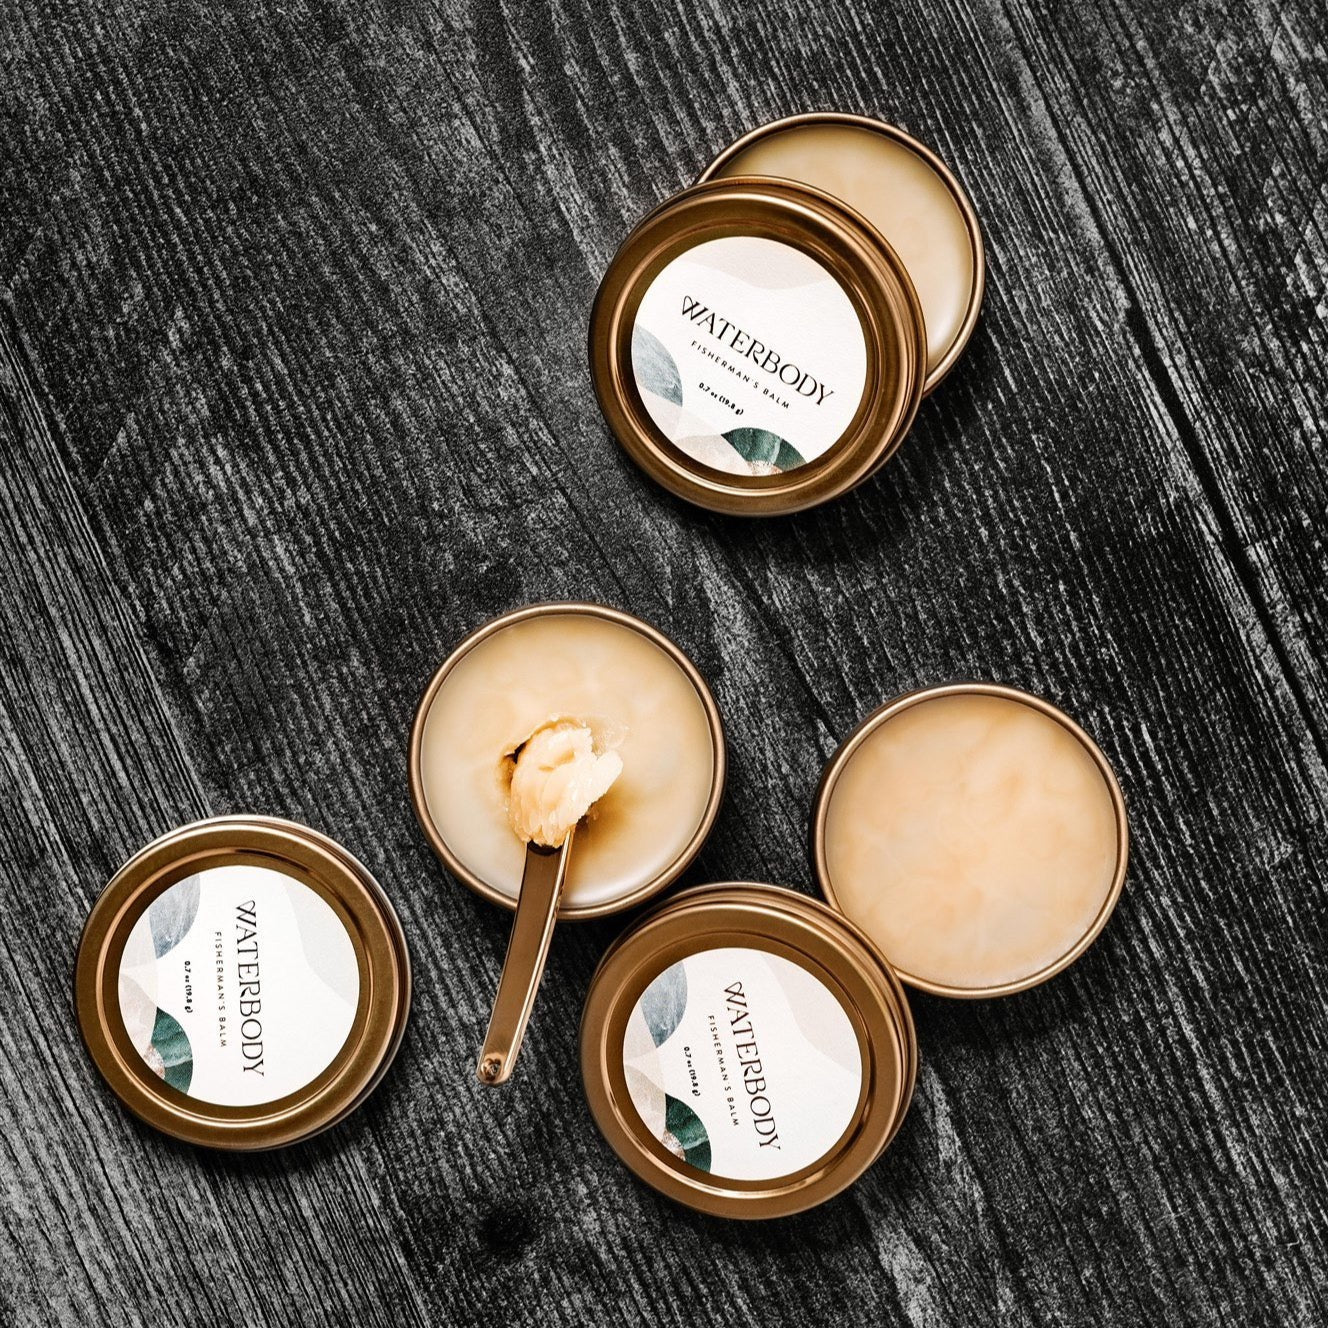 Three tins of hand salve sit opened against a grey wood backdrop. The tins are round, golden, and hold a buttery textured balm.